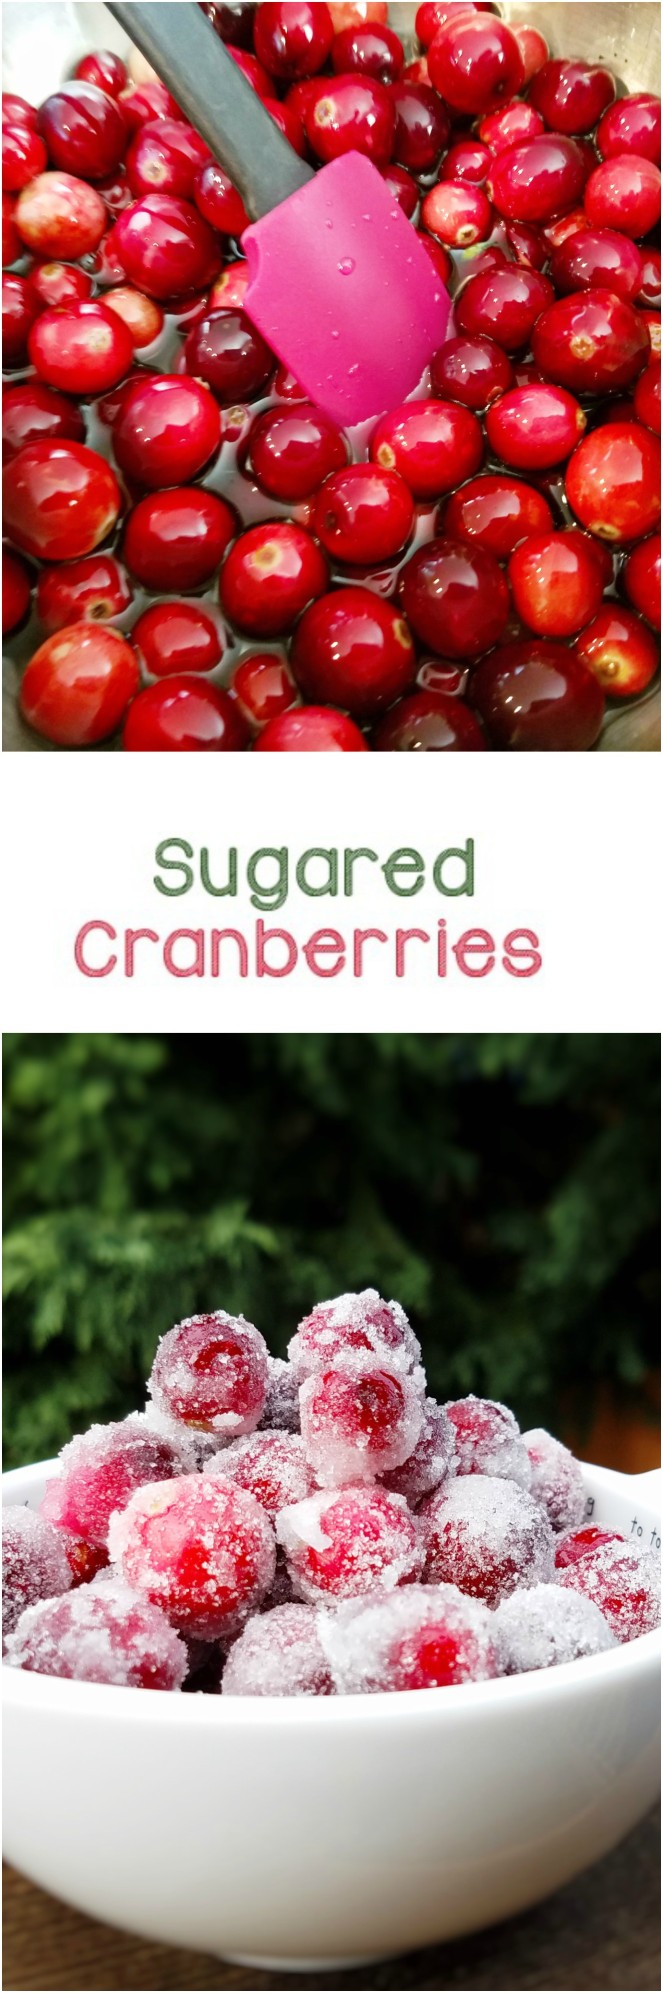 Sugared Cranberries - Rumbly in my Tumbly